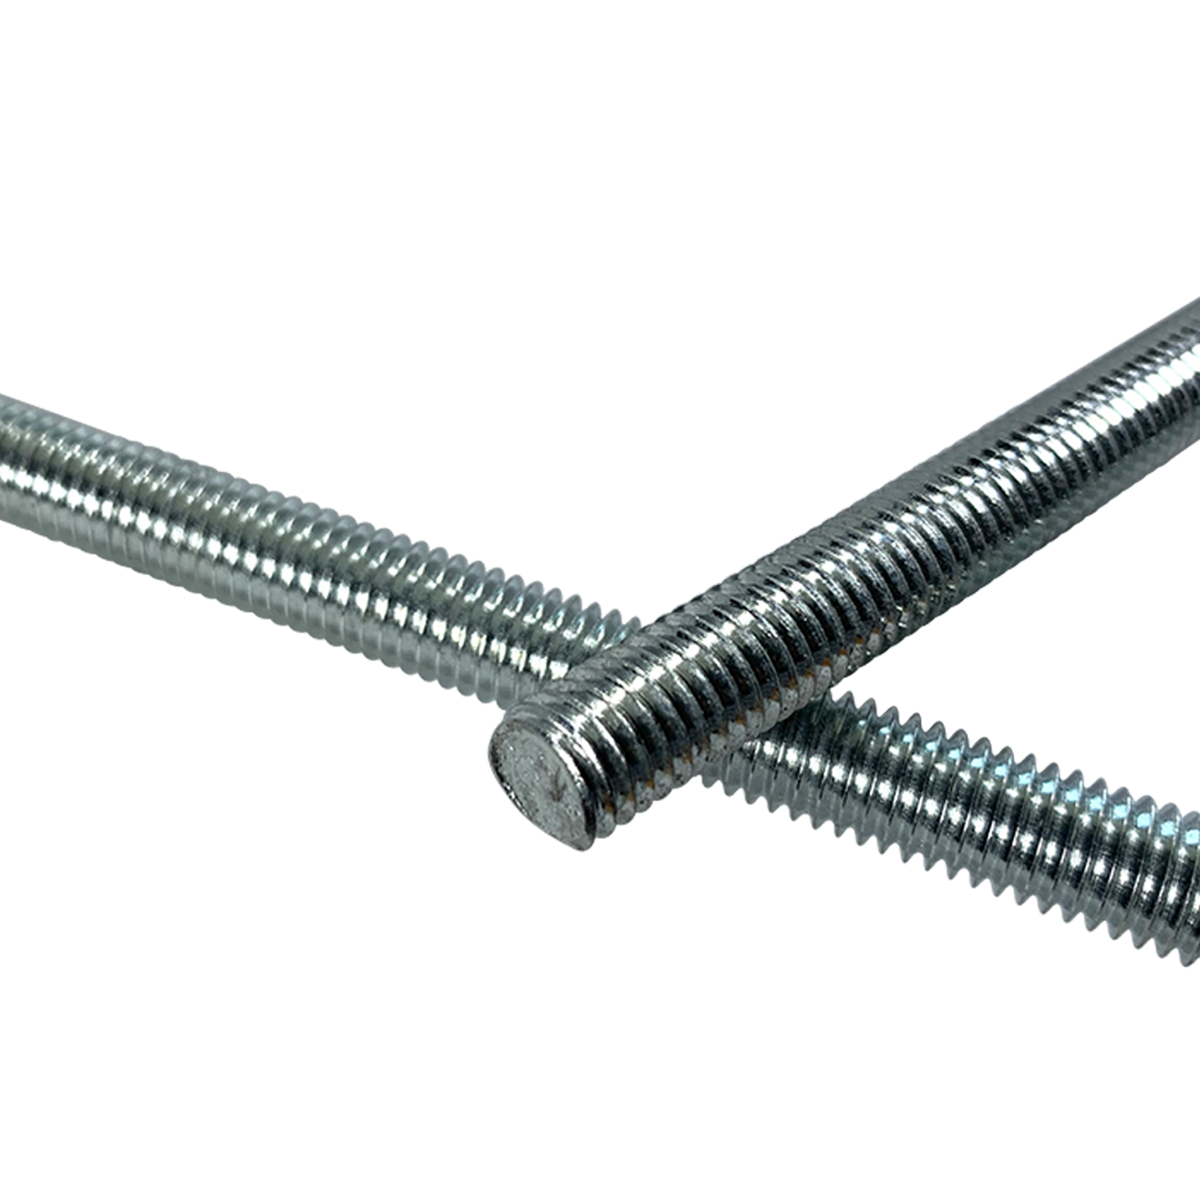 BZP - (Bright Zinc Plated) threaded Bar, also known as threaded rod and studding is available in a variety of diameters and at competitive prices with Fusion Fixings.